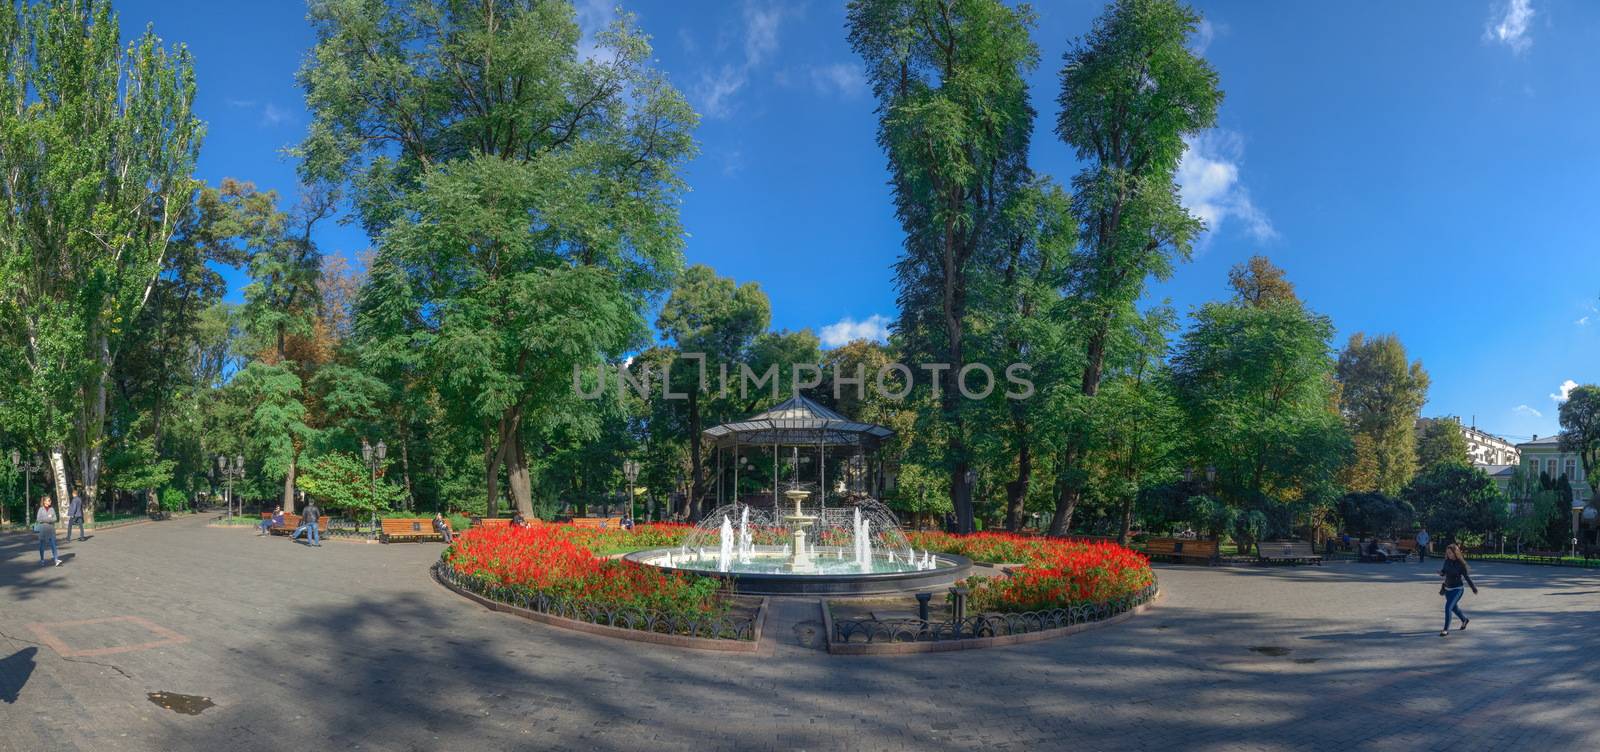 Odessa City Garden panoramic view by Multipedia